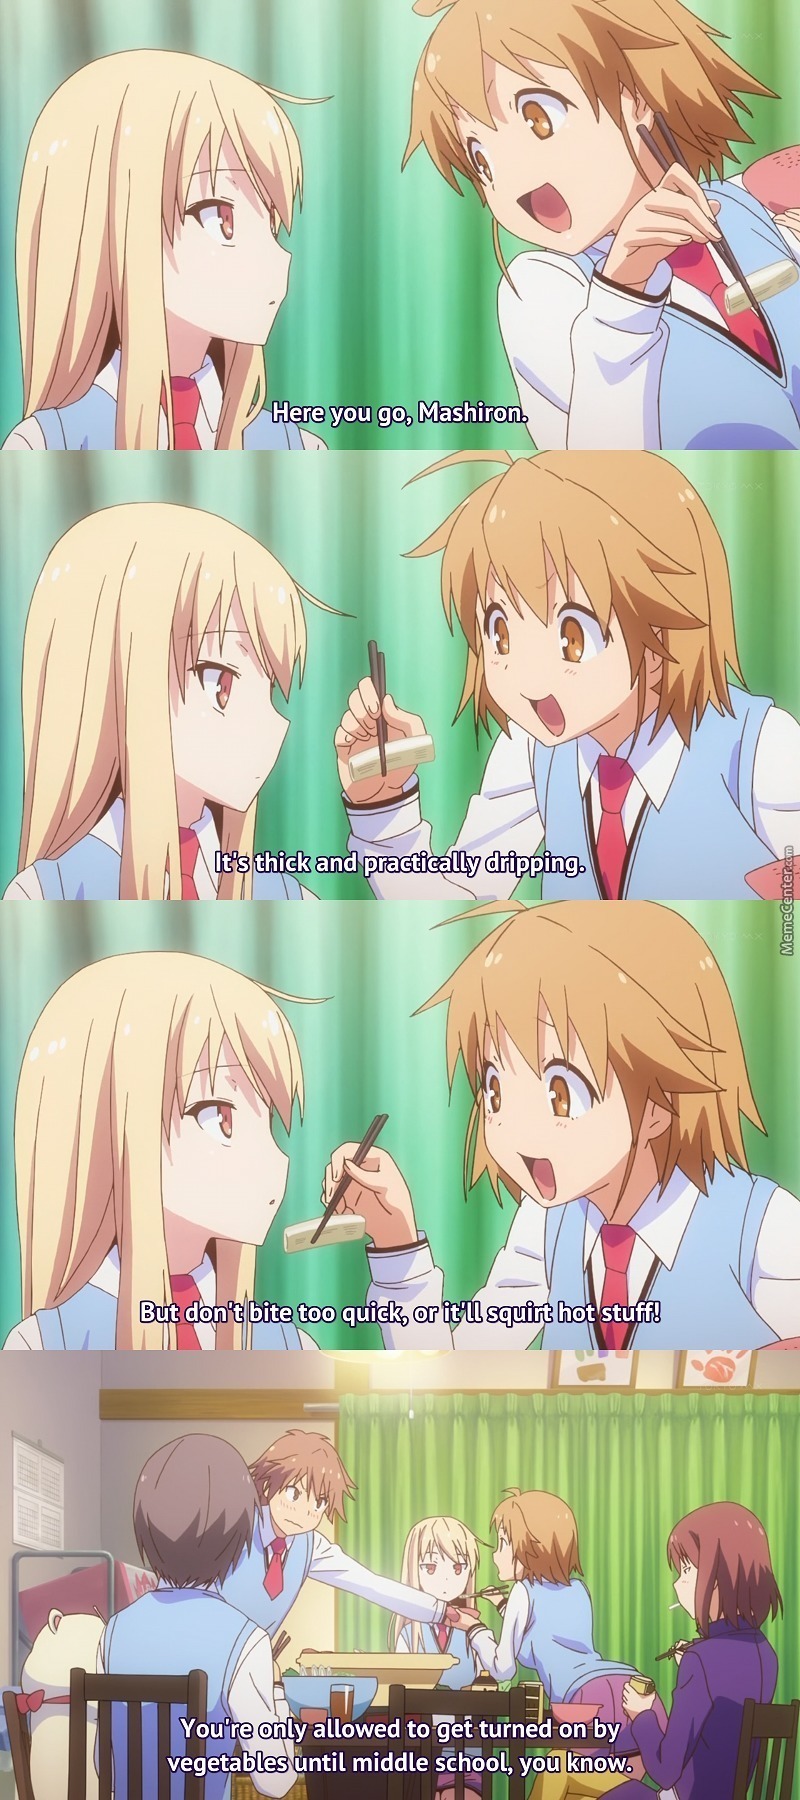 The anime is The Pet Girl Of Sakurasou(i recomend it) - Meme by  TheNiceDemon :) Memedroid